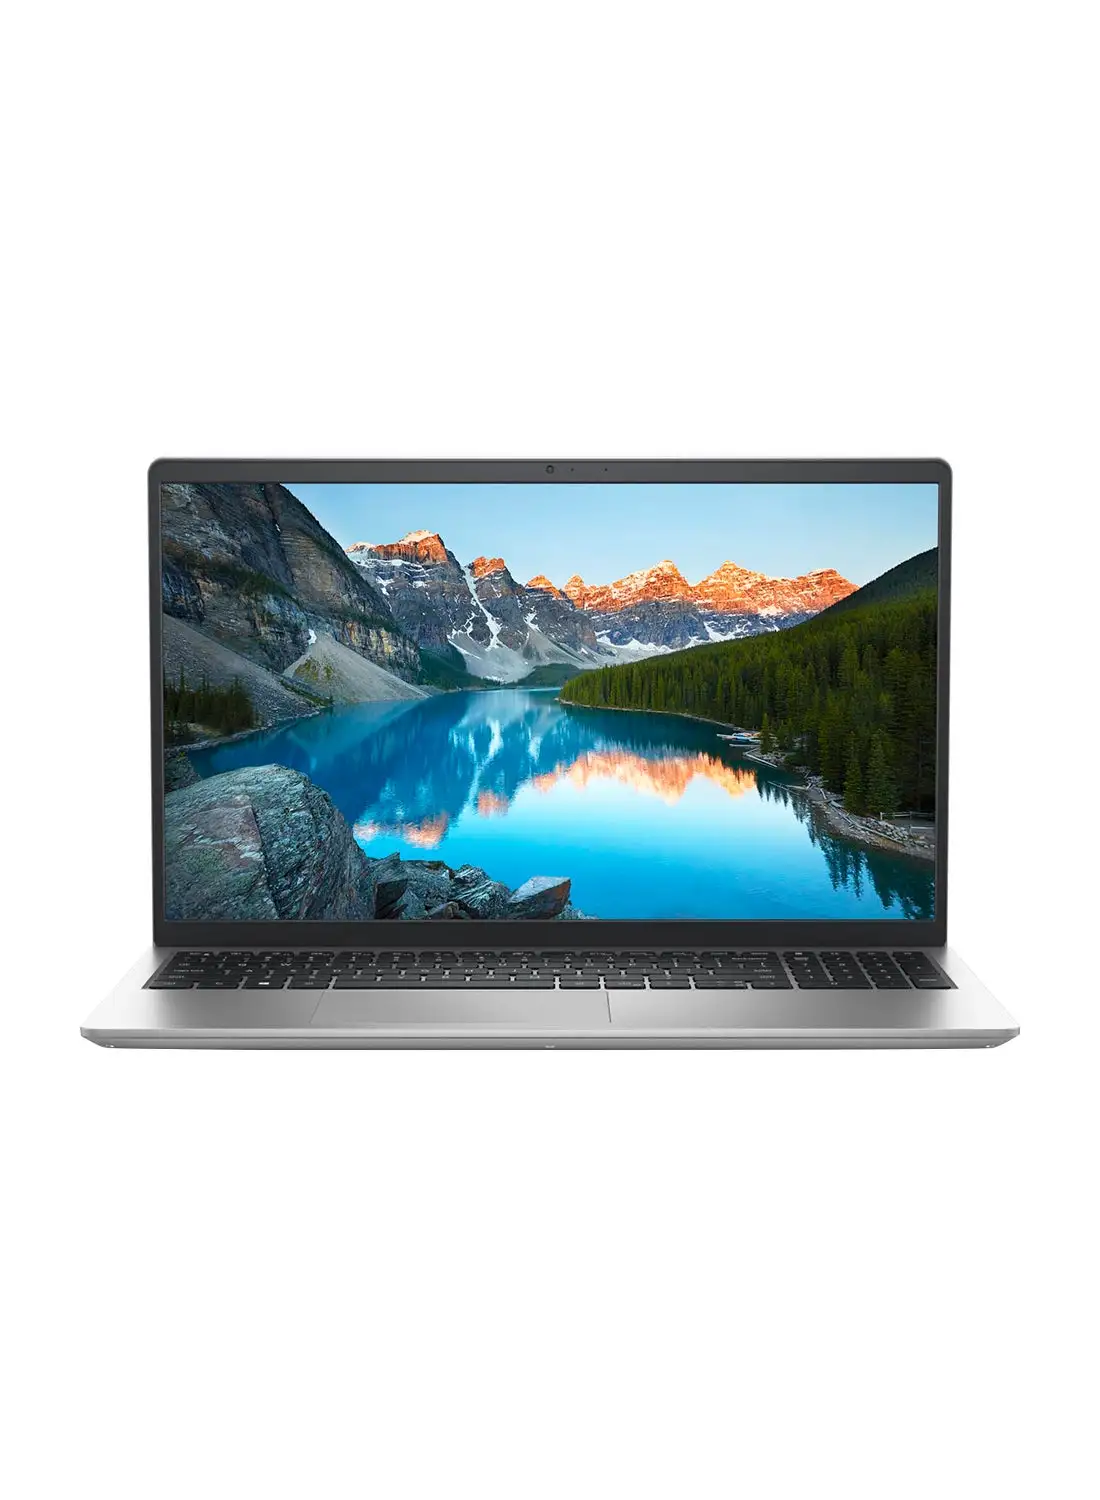 DELL Inspiron 3511 Laptop With 15.6-Inch Display, Core i5-1135G7 Processor / 8GB RAM / 256GB SSD + 1TB HDD / W11 Home / English Platinum Silver